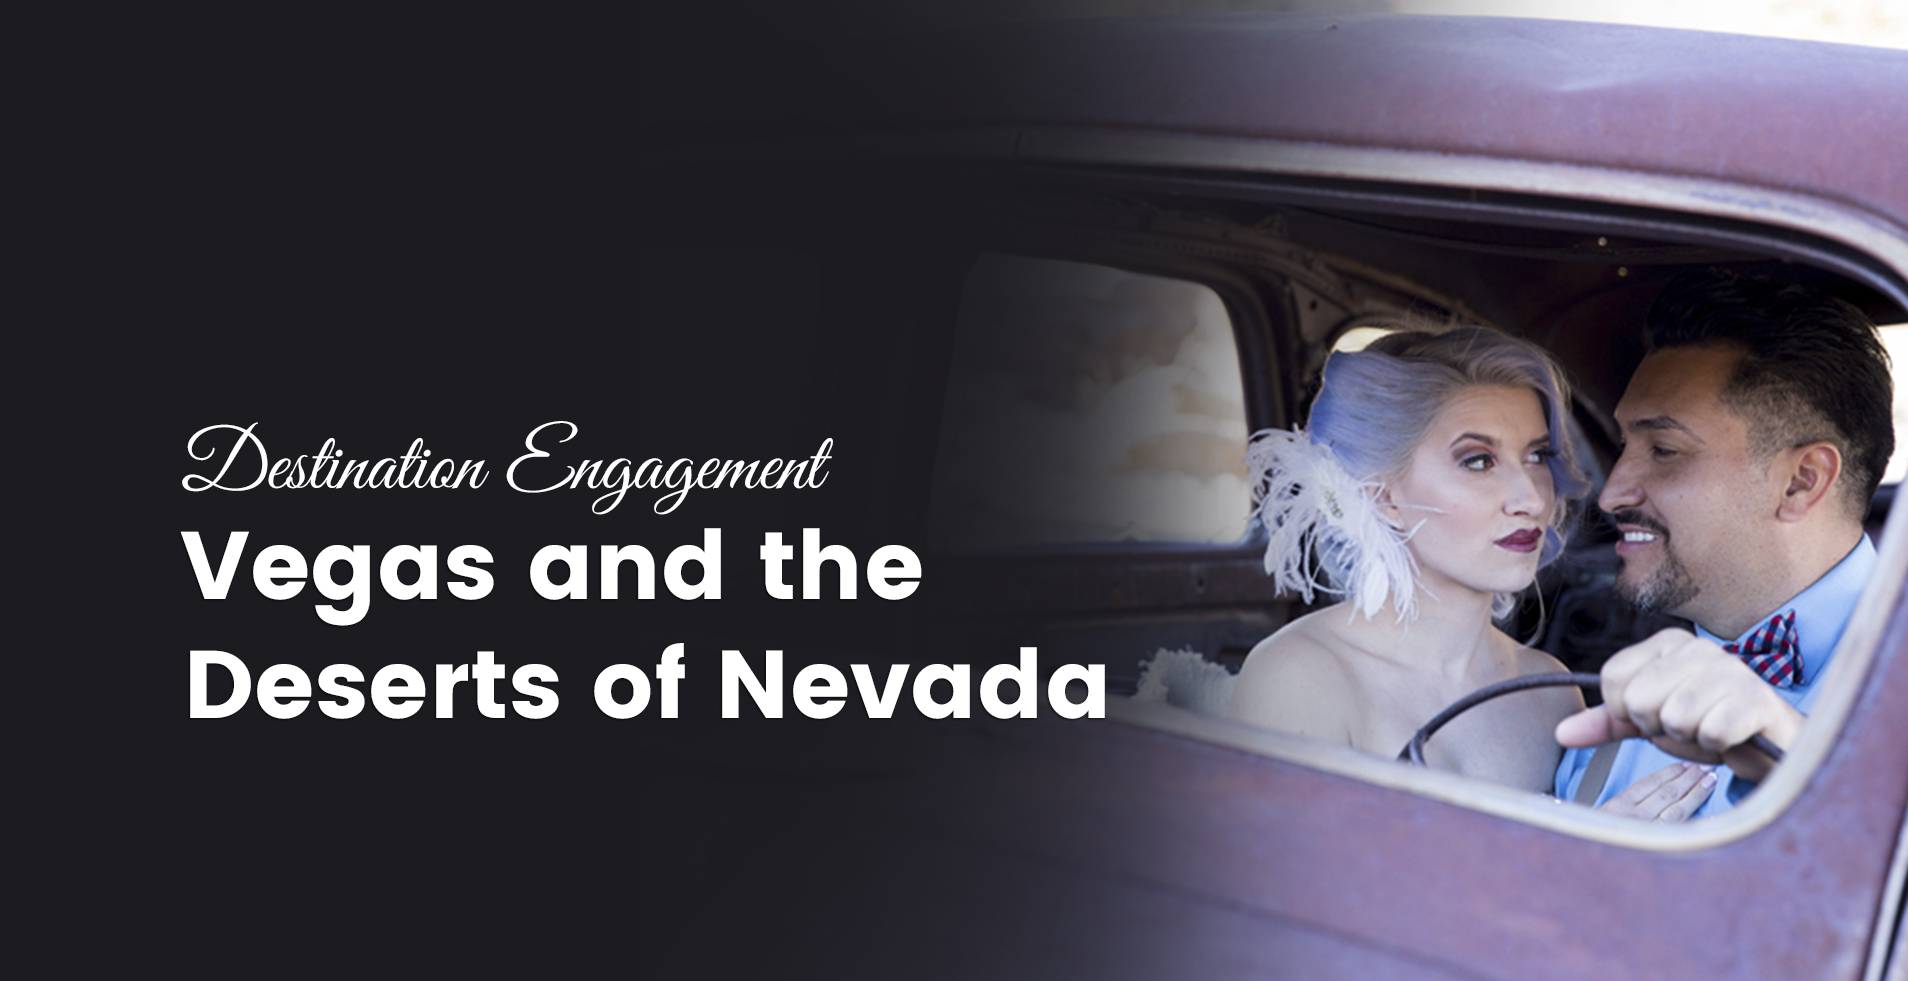 Destination Engagement - Vegas and the deserts of Nevada